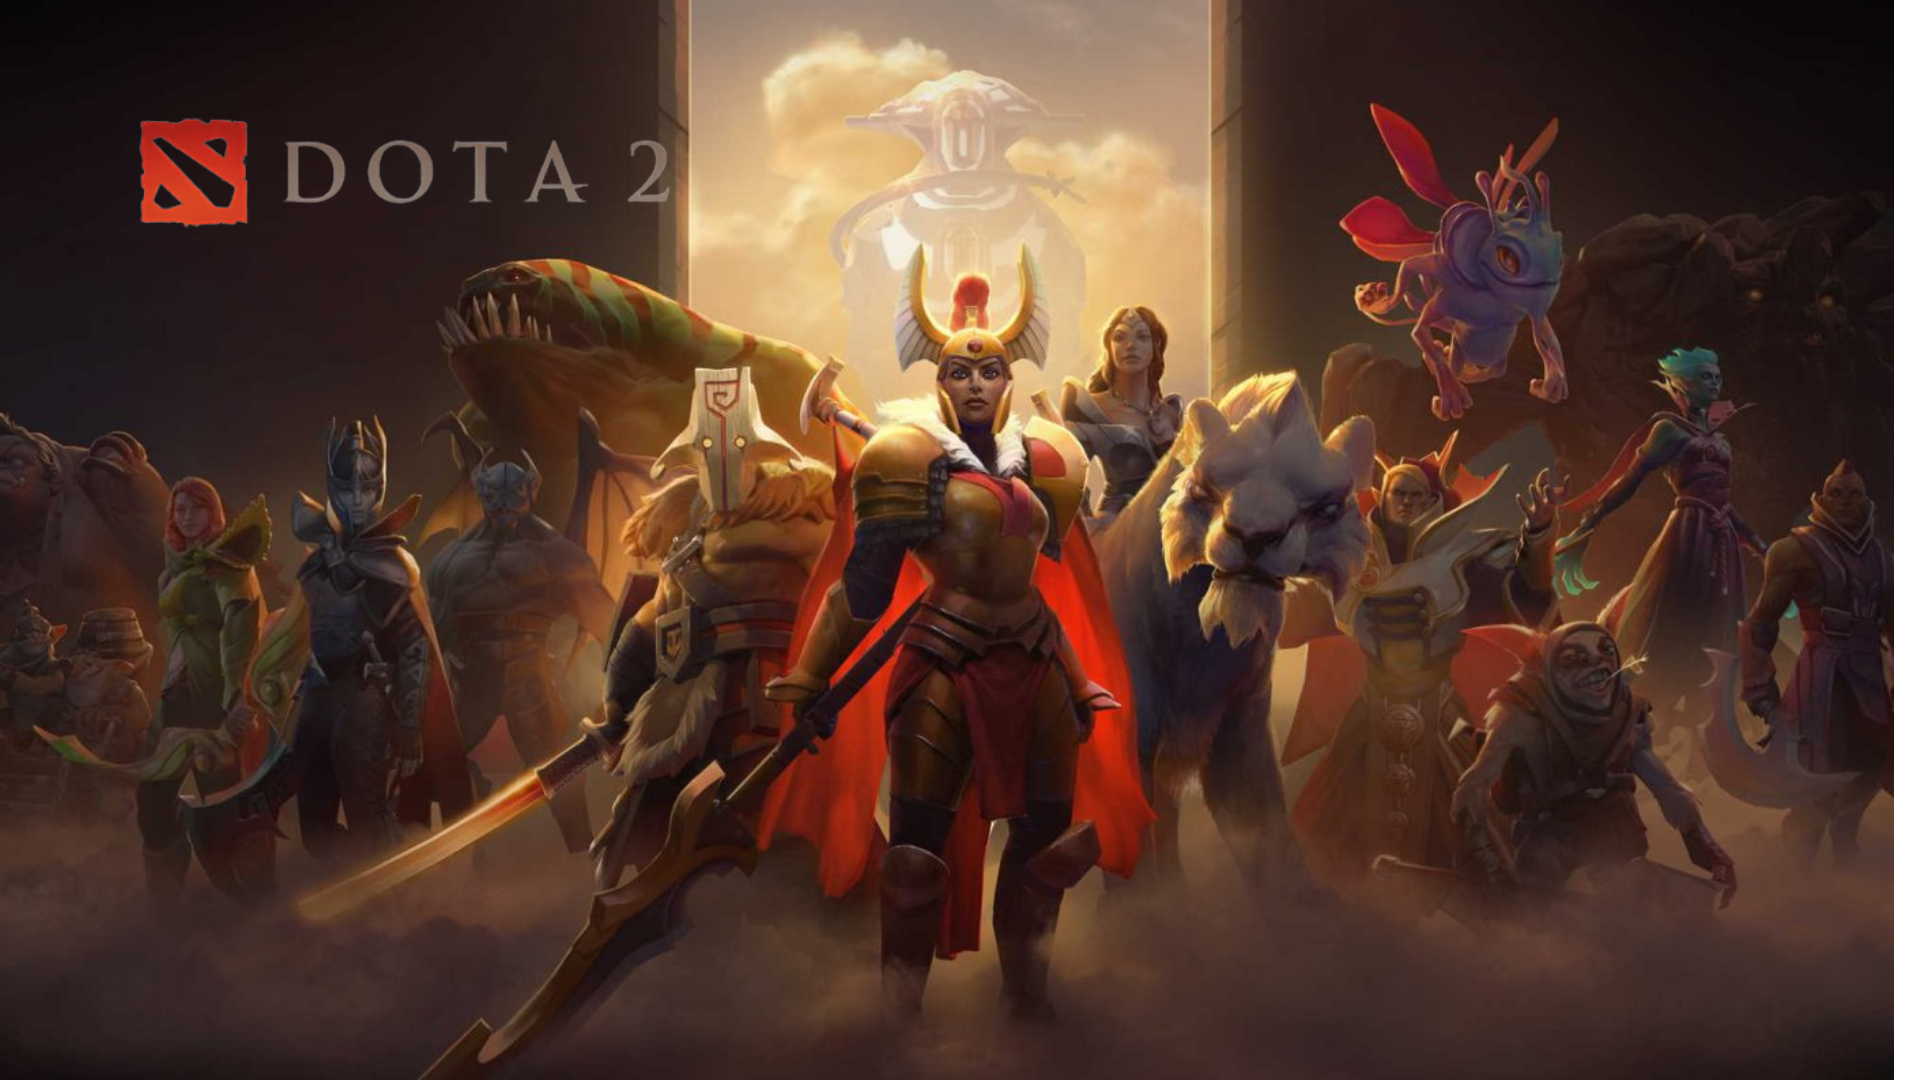 DOTA 2 International Battle Pass 11 COUNTDOWN Release Date, Time, Rewards, Price and Latest News